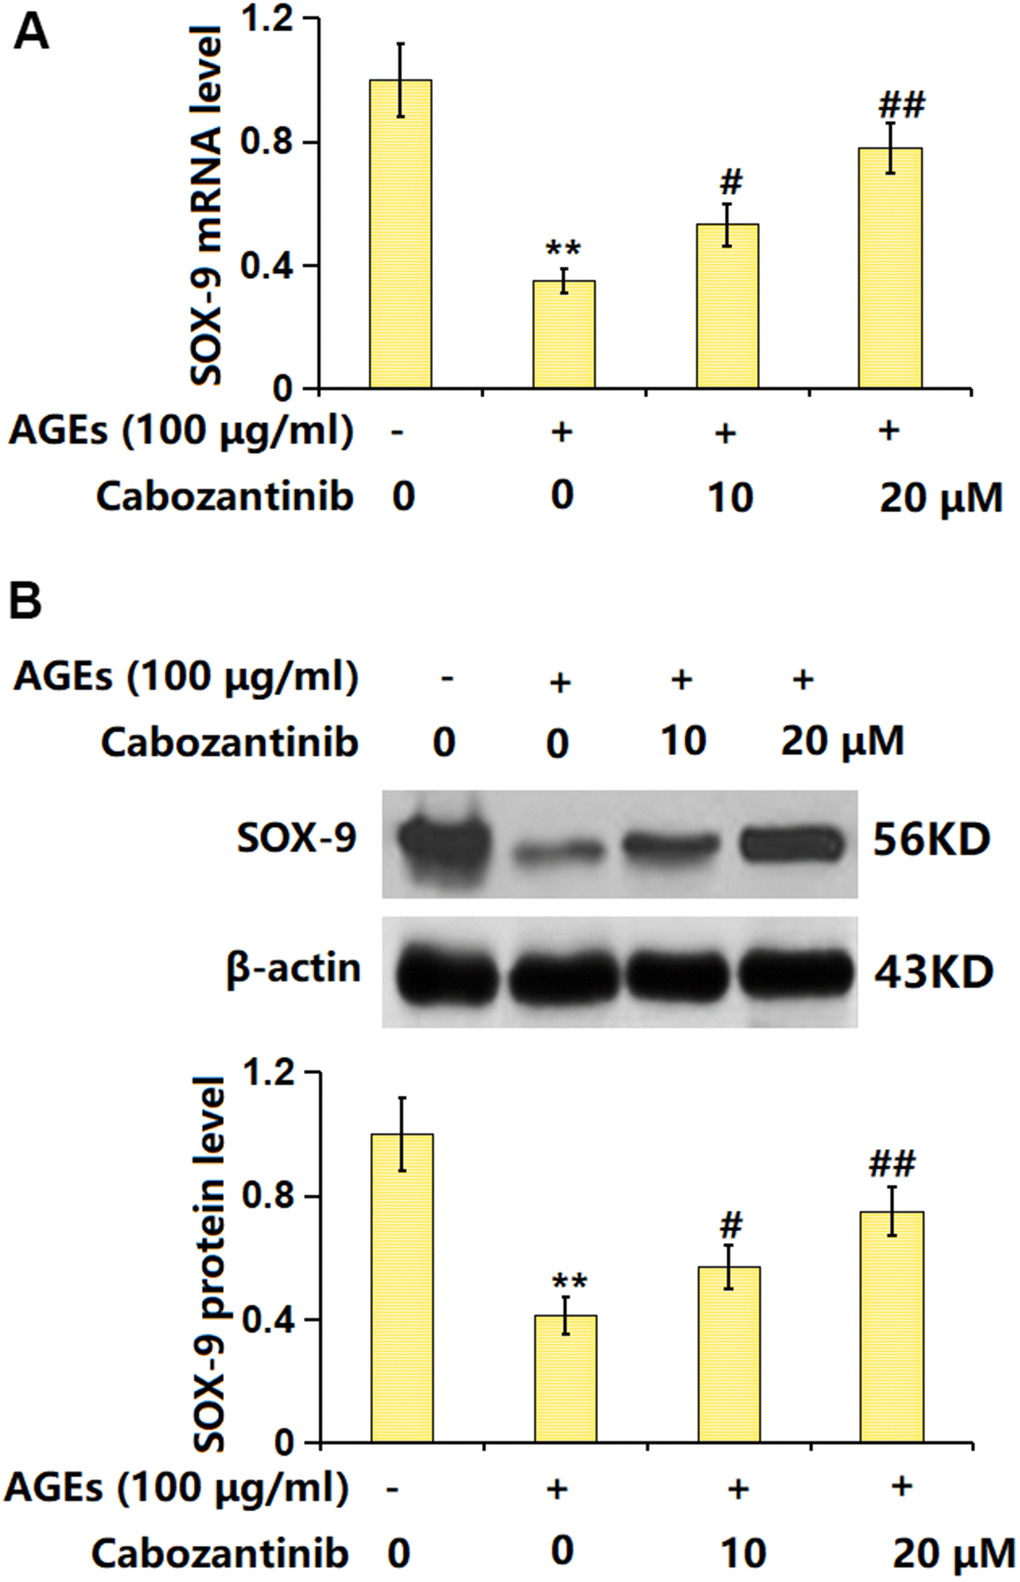 Cabozantinib upregulated SOX-9 in AGEs-treated SW1353 chondrocytes. SW1353 chondrocytes were stimulated with 100 μg/ml AGEs with or without 10 and 20 μM Cabozantinib for 24 h. (A) mRNA level of SOX-9. (B) Protein level of SOX-9 (n=6, *, ** PP